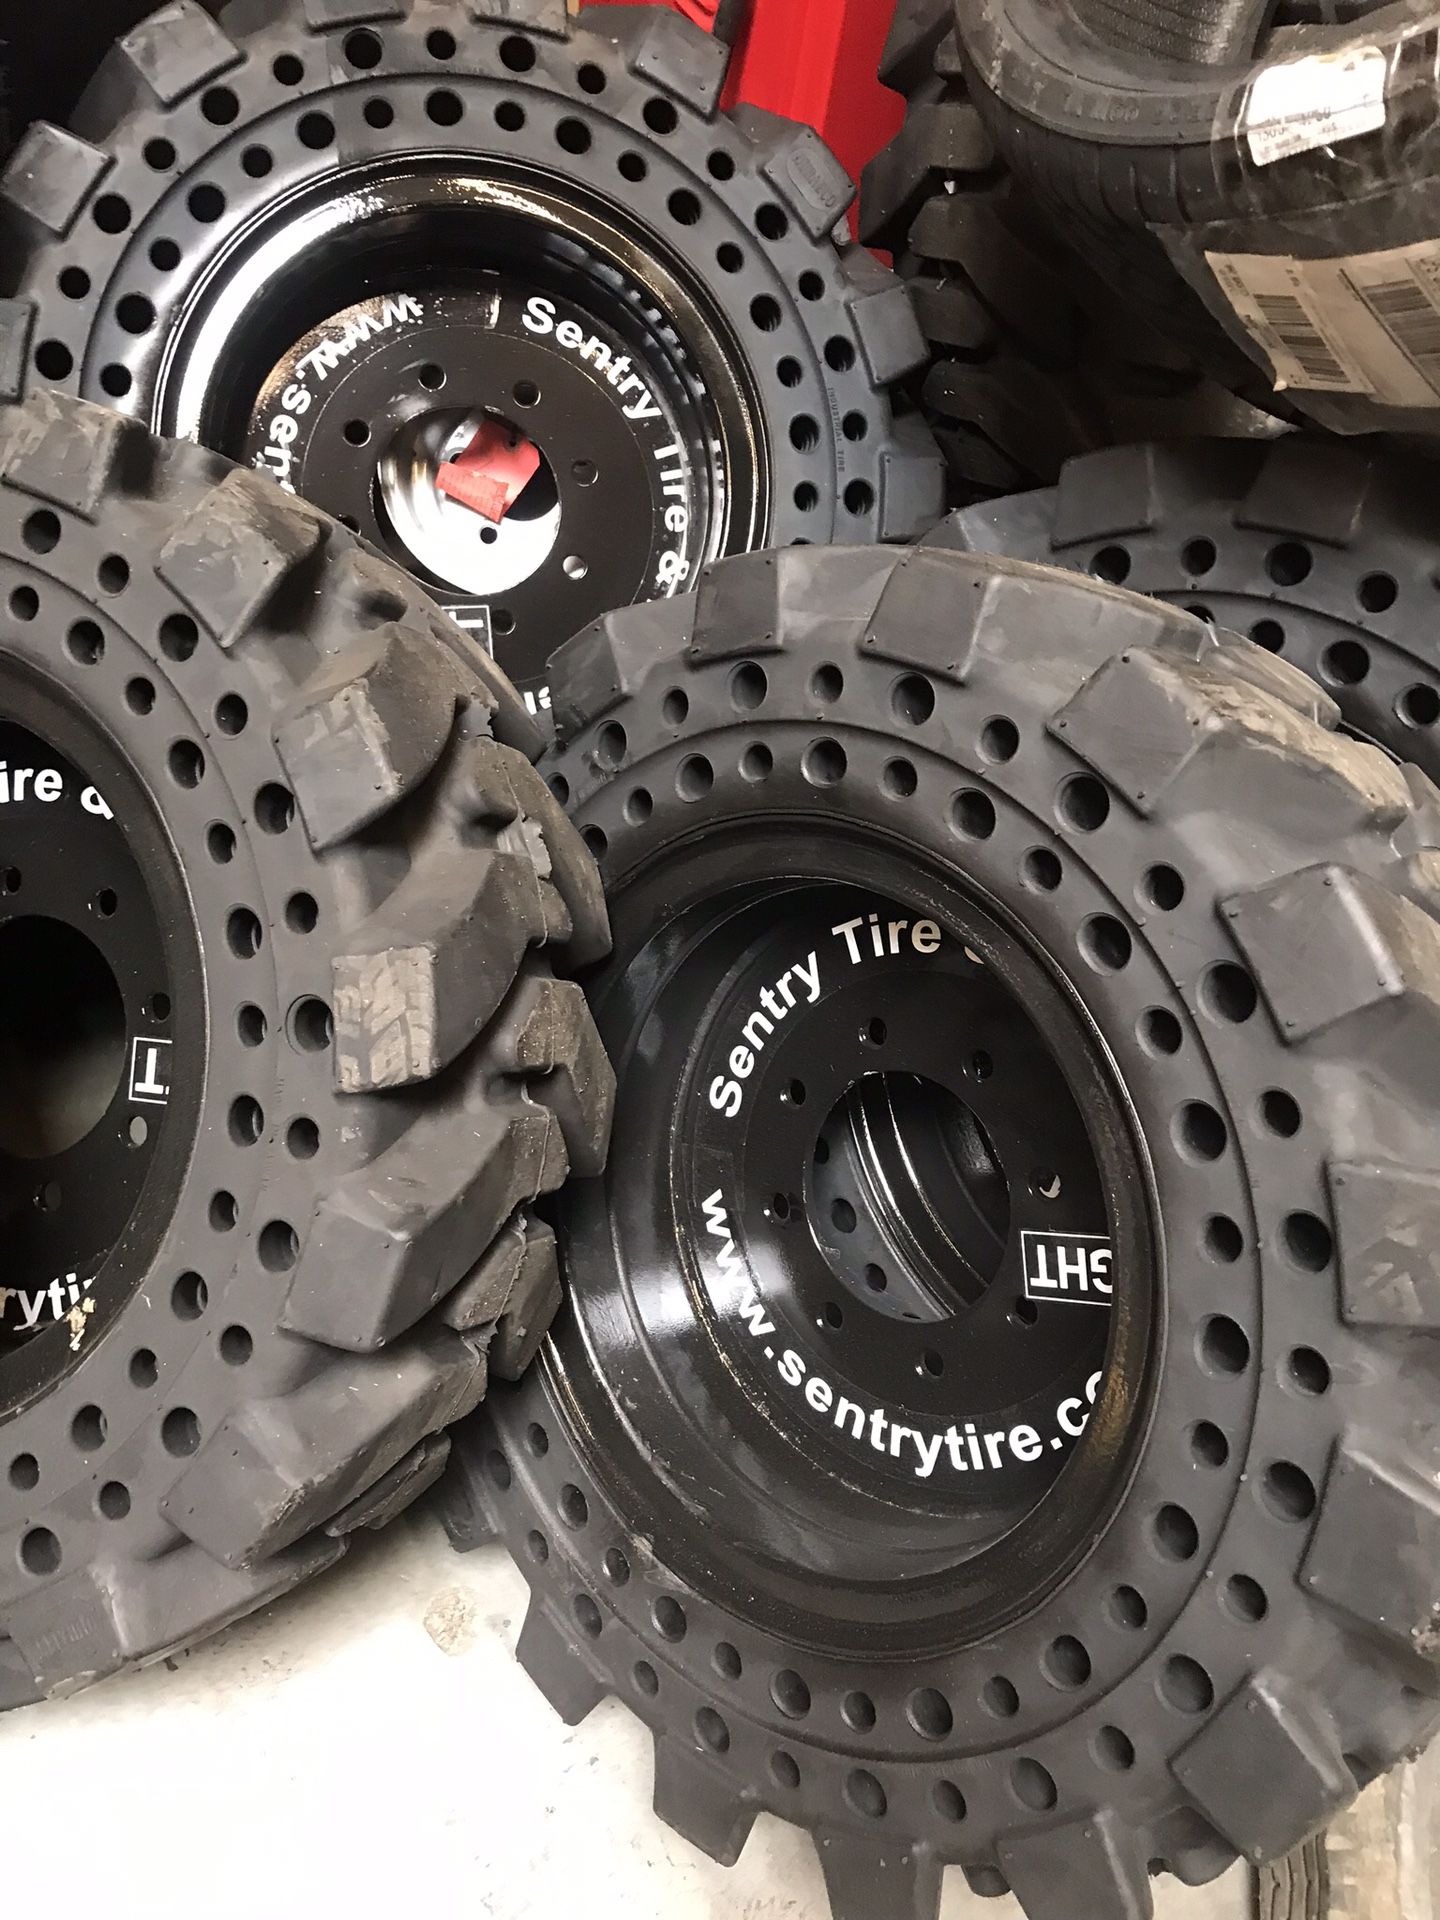 4x 10-16.5 solid tires bobcat tires with rim